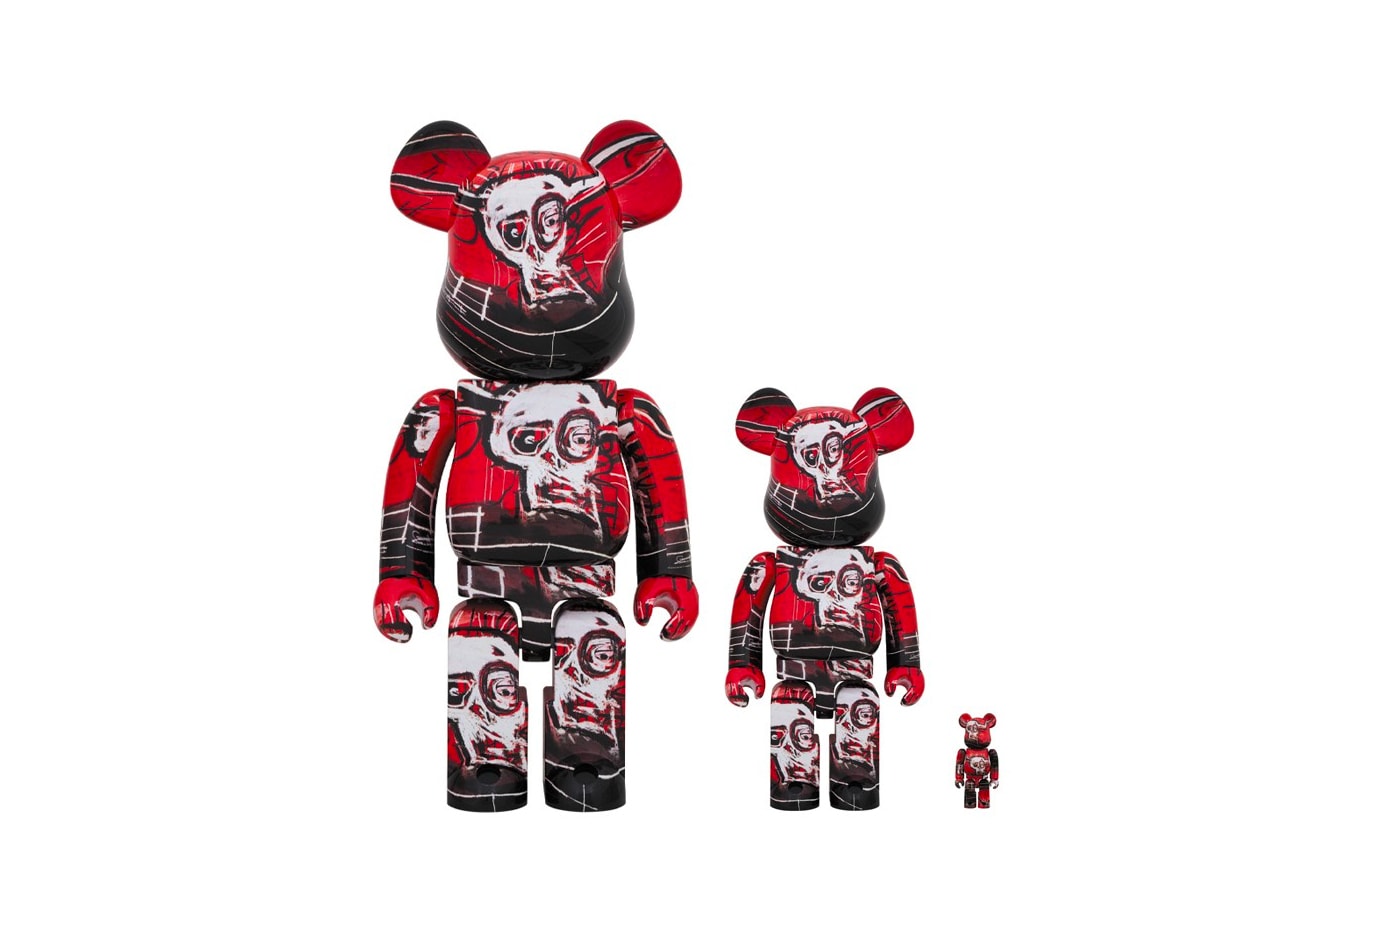 Medicom Toy Drops New jean michel- Basquiat & keith haring Haring BE@RBRICKs 100% 400% 1000% release price info artworks 